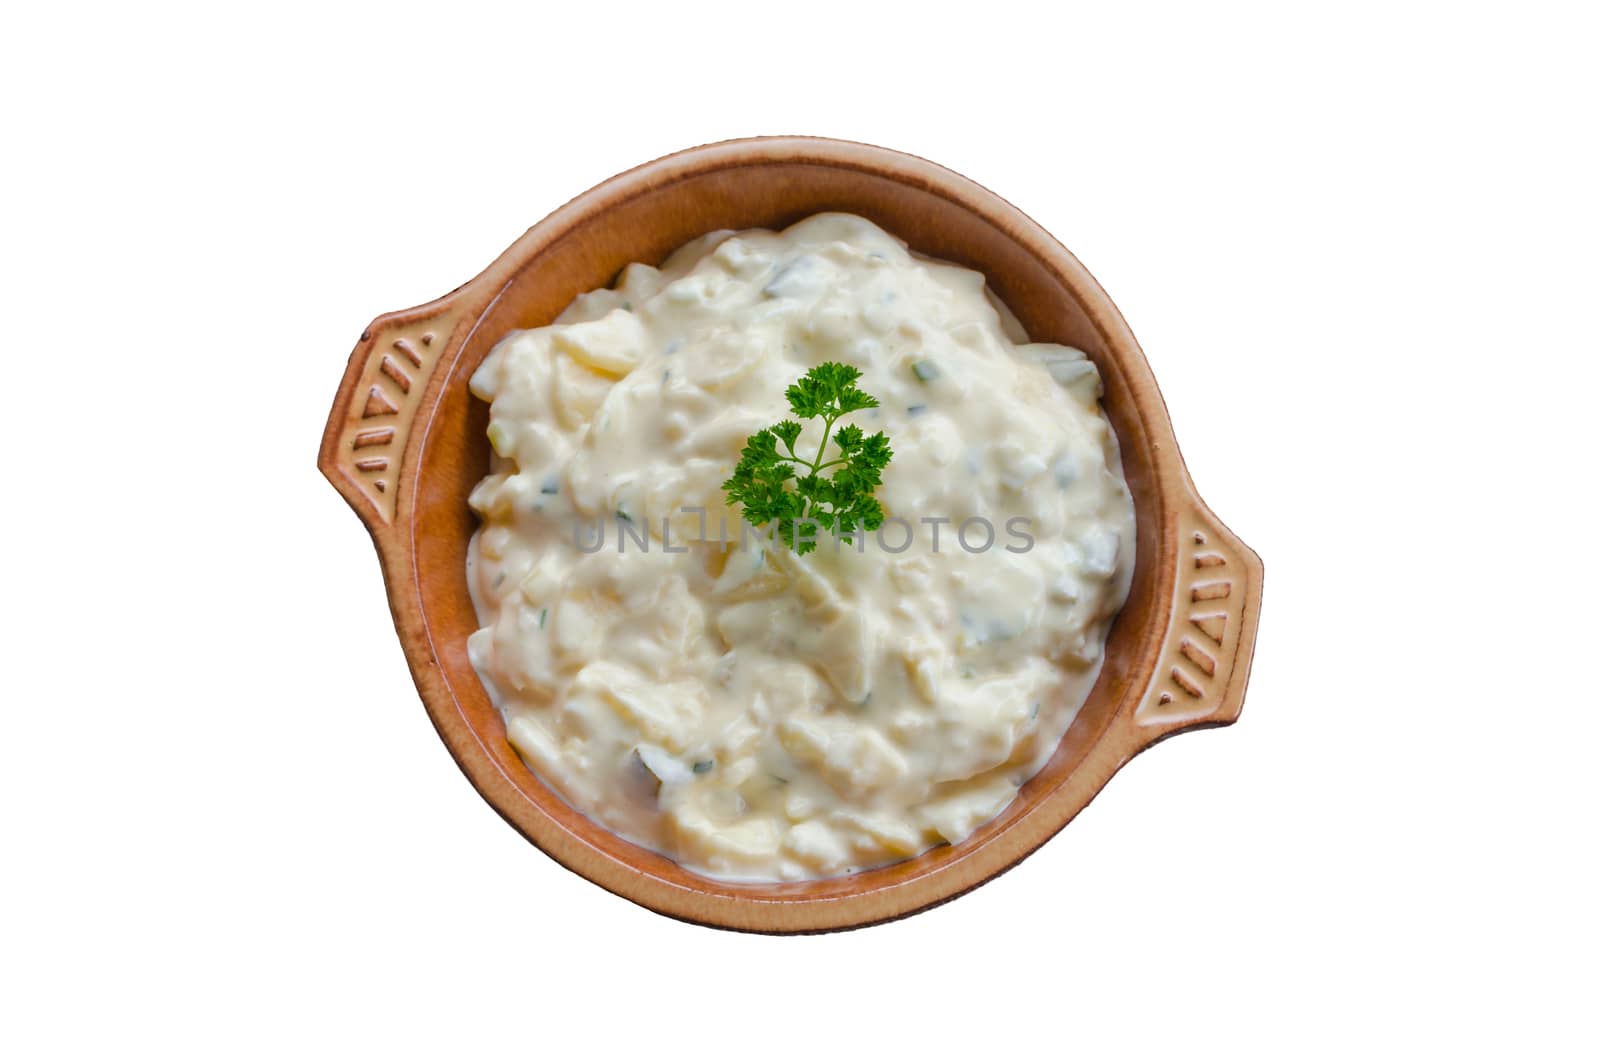 Top view of a little brown bowl with a serving of potato salad. Isolated on white 
details